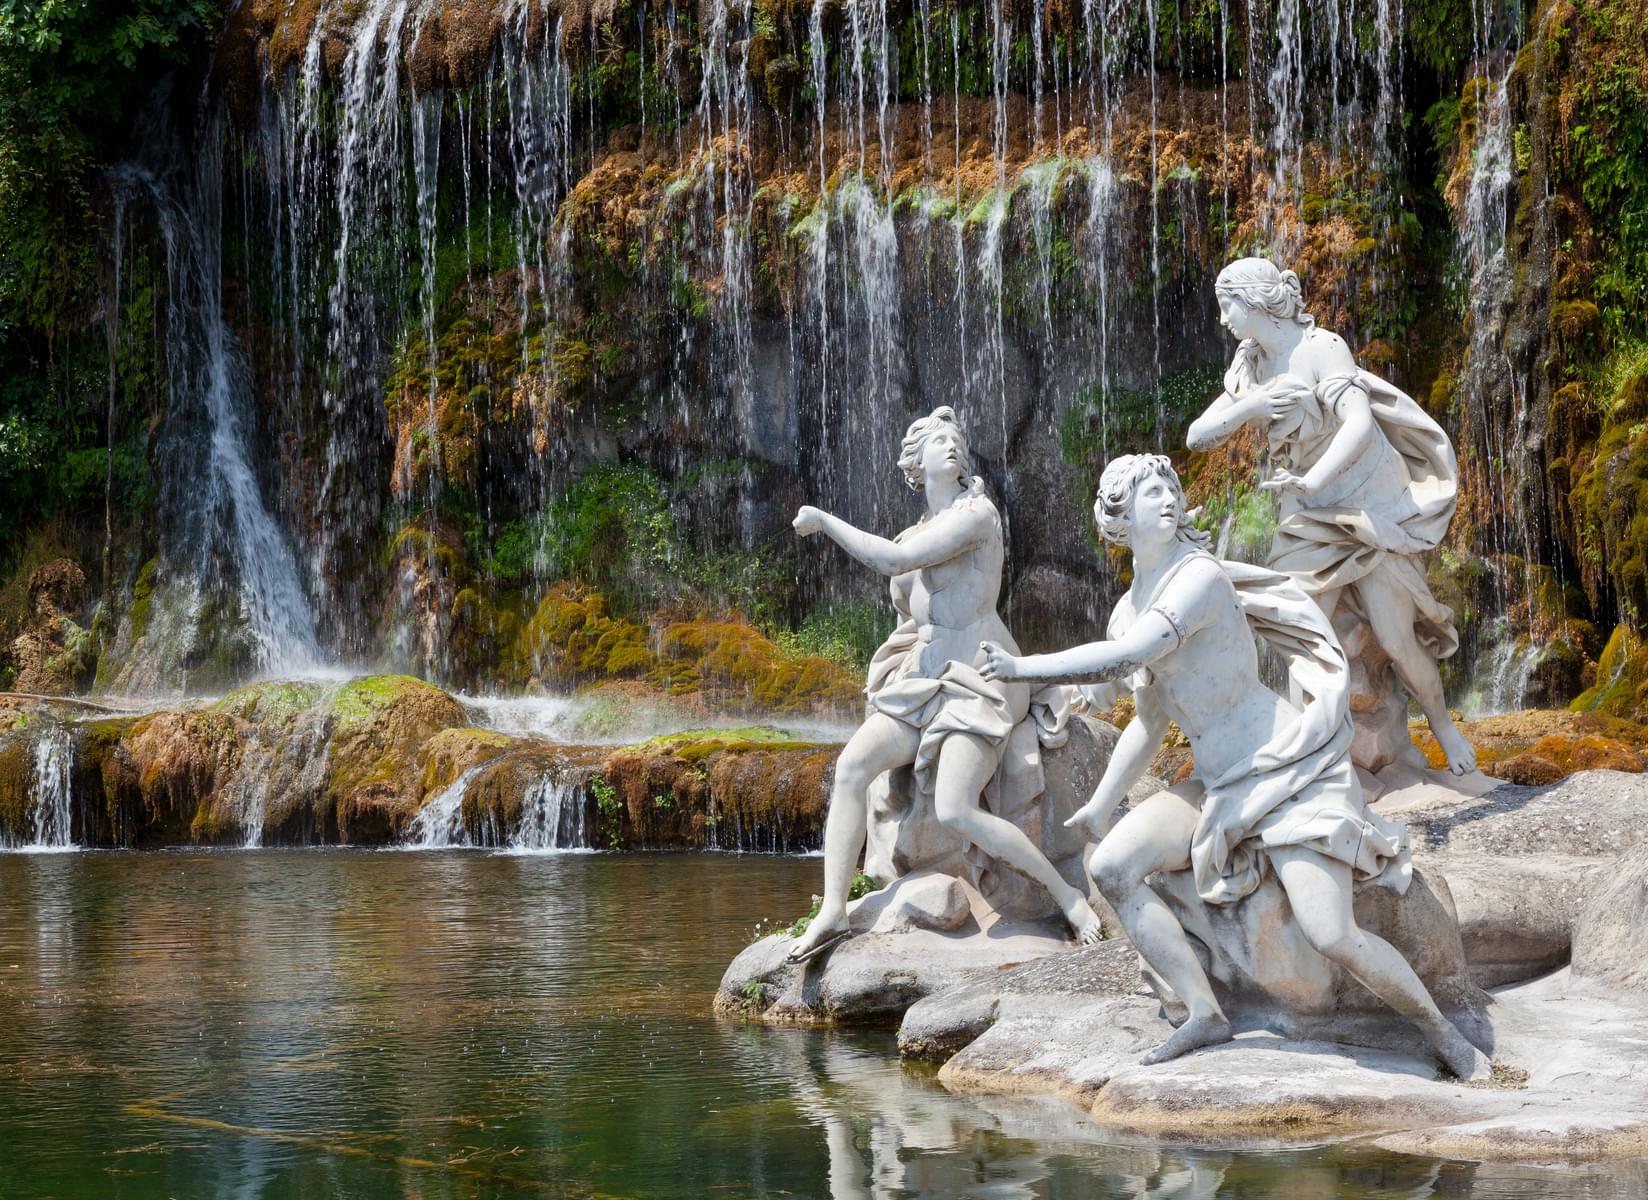 Fountain of Venus and Adonis